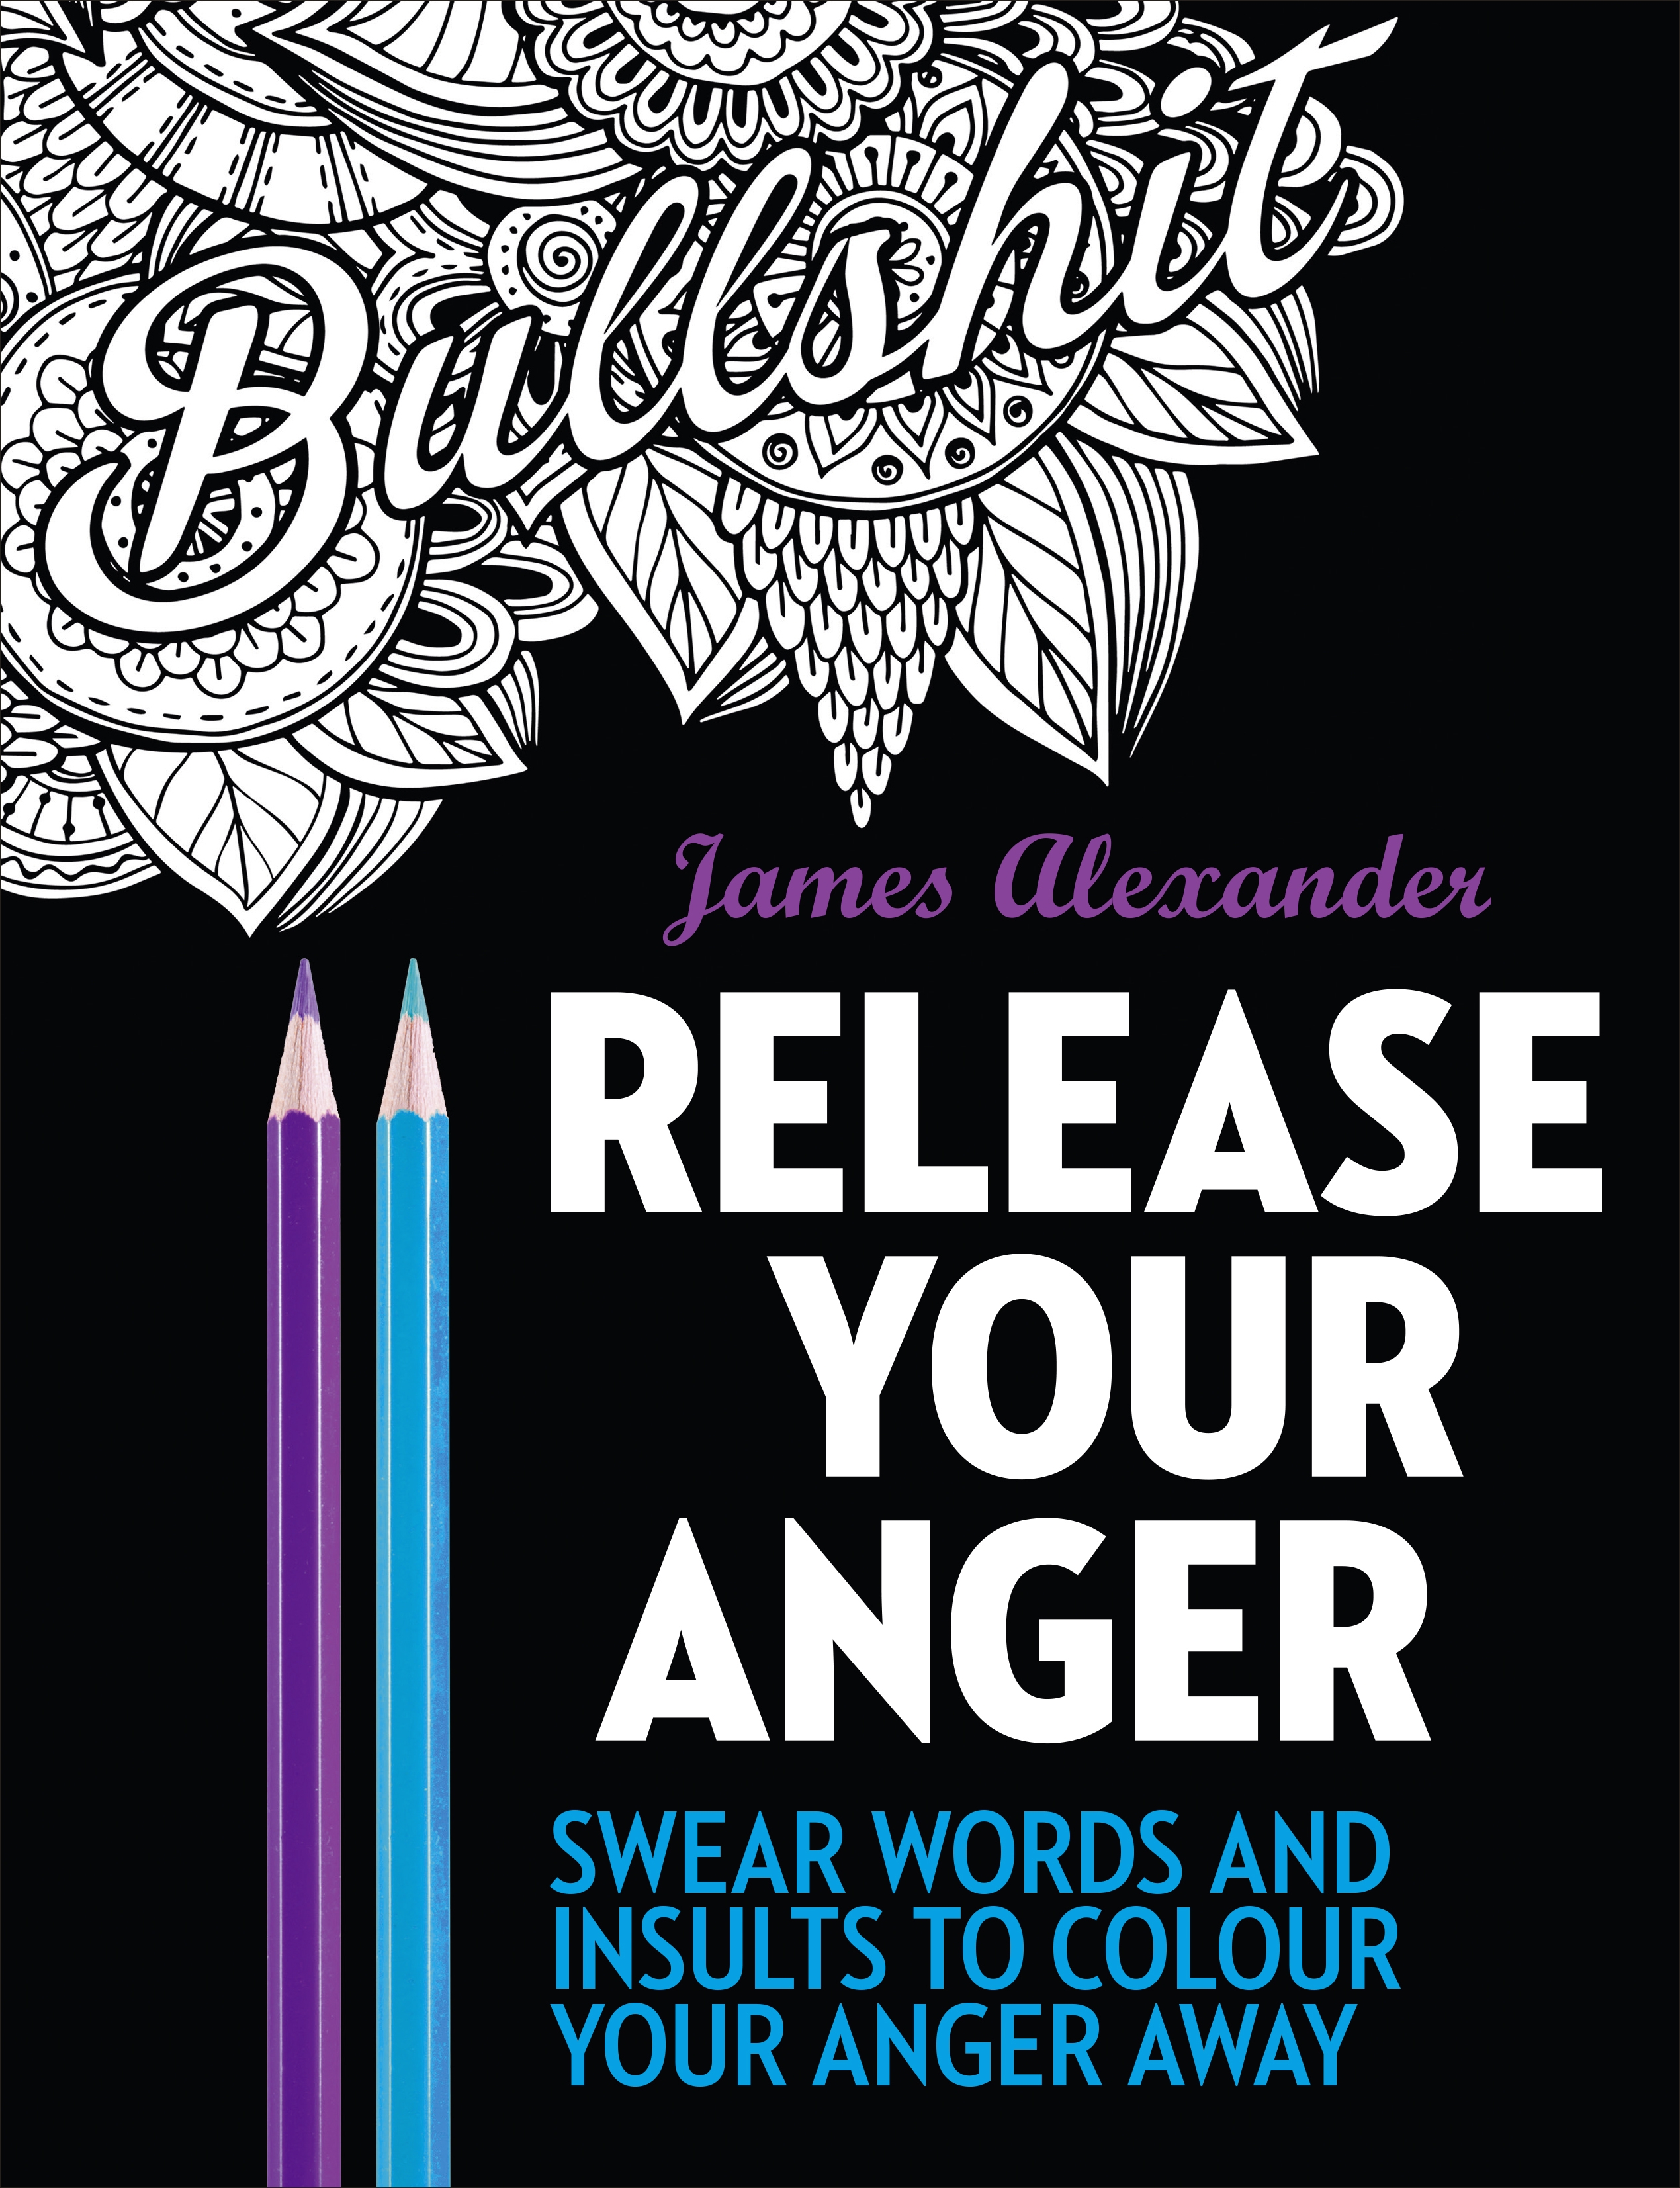 Download Release Your Anger Midnight Edition An Adult Coloring Book With 40 Swear Words To Color And Relax By James Alexander Penguin Books New Zealand